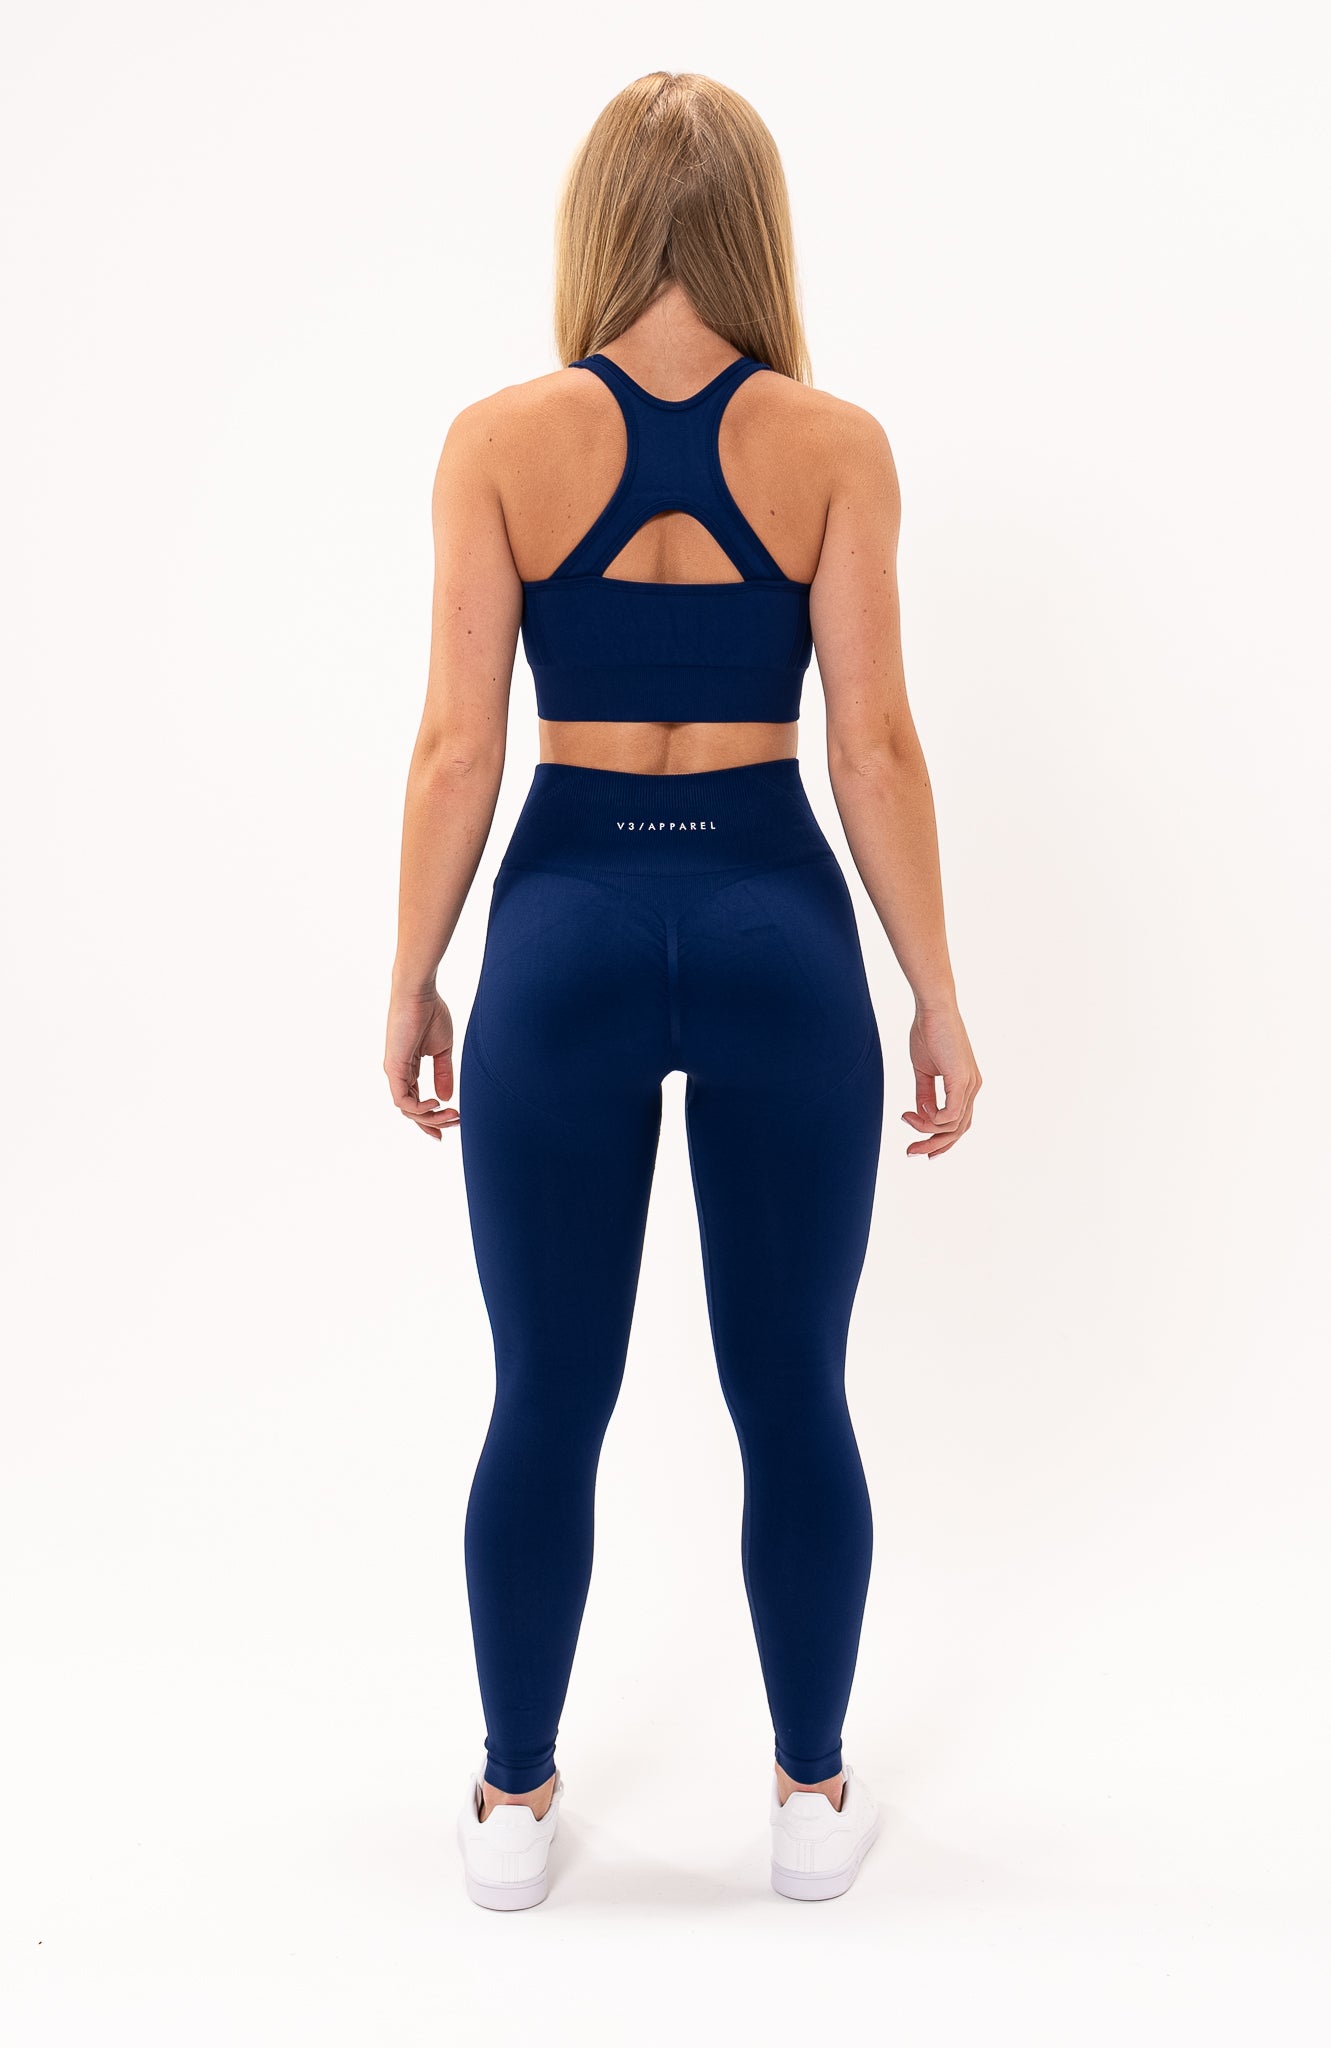 V3 Apparel Women's Tempo seamless scrunch bum shaping high waisted leggings and training sports bra in royal navy blue – Squat proof sports tights and training bra for Gym workouts training, Running, yoga, bodybuilding and bikini fitness.